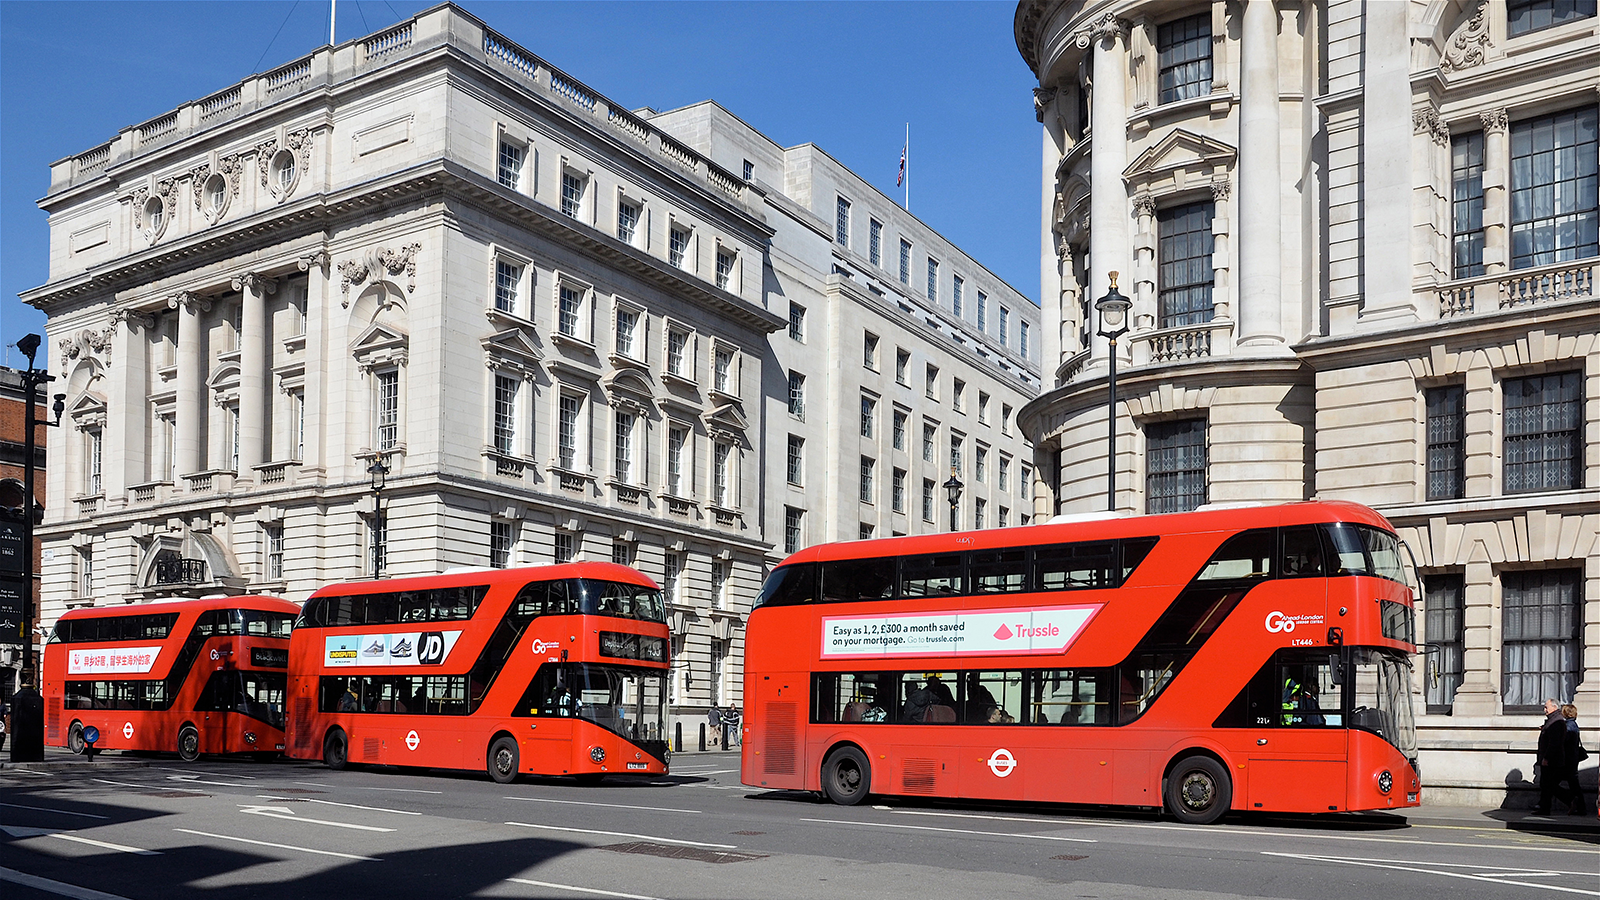 £100m plan to electrify London’s buses announced